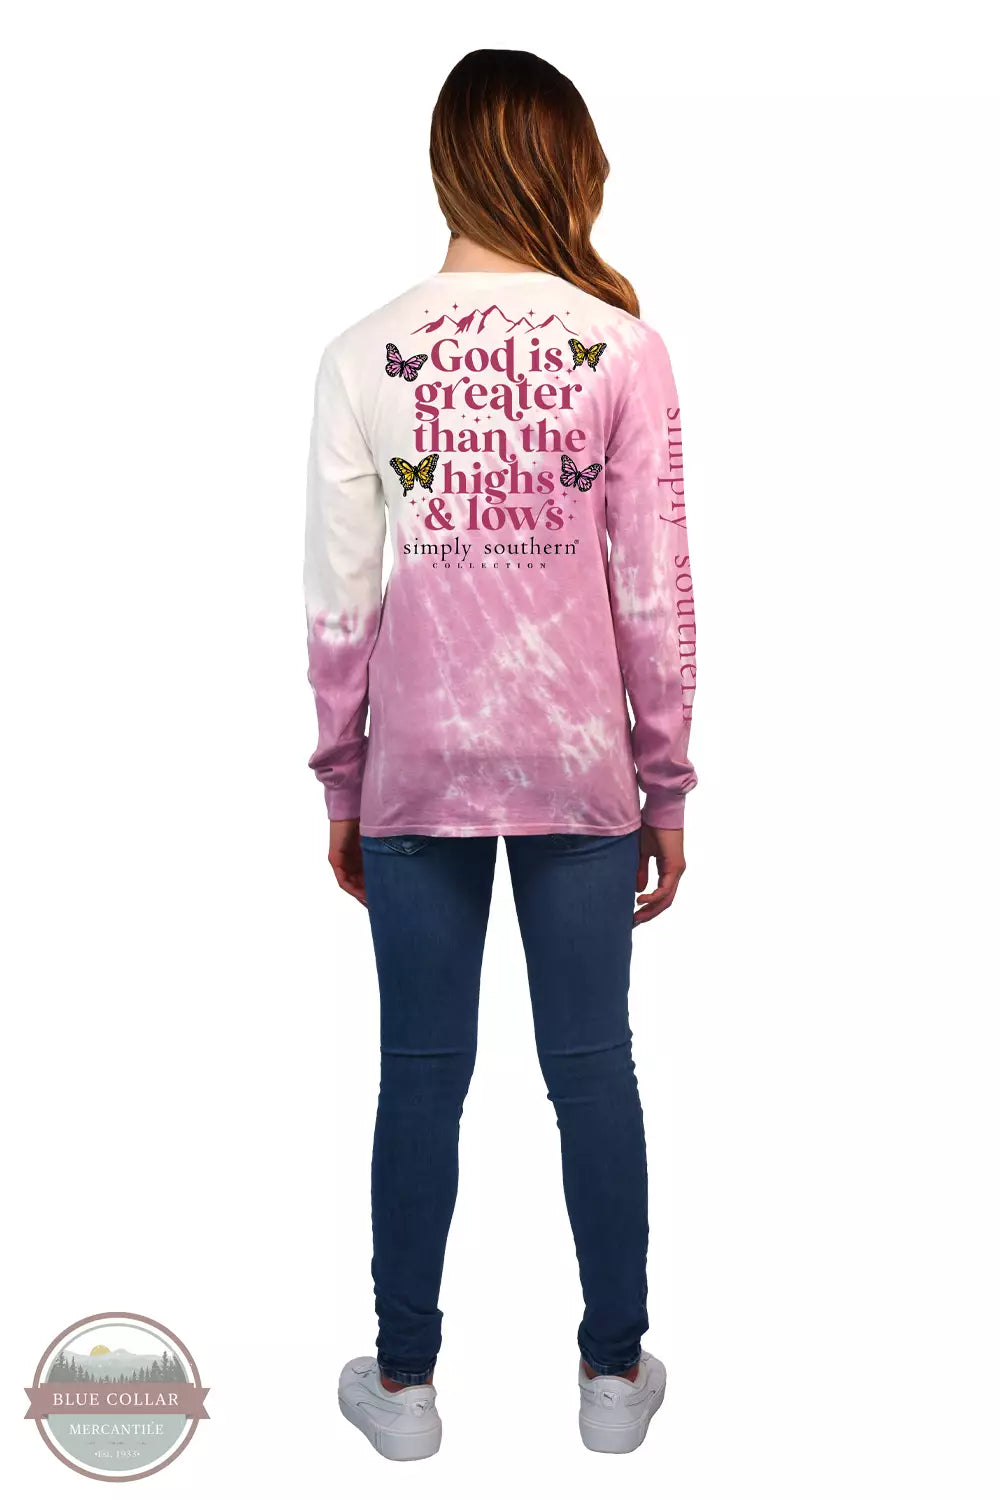 Simply Southern LS-GGHL-ASPEN God Is Greater Long Sleeve T-Shirt in Aspen Full View